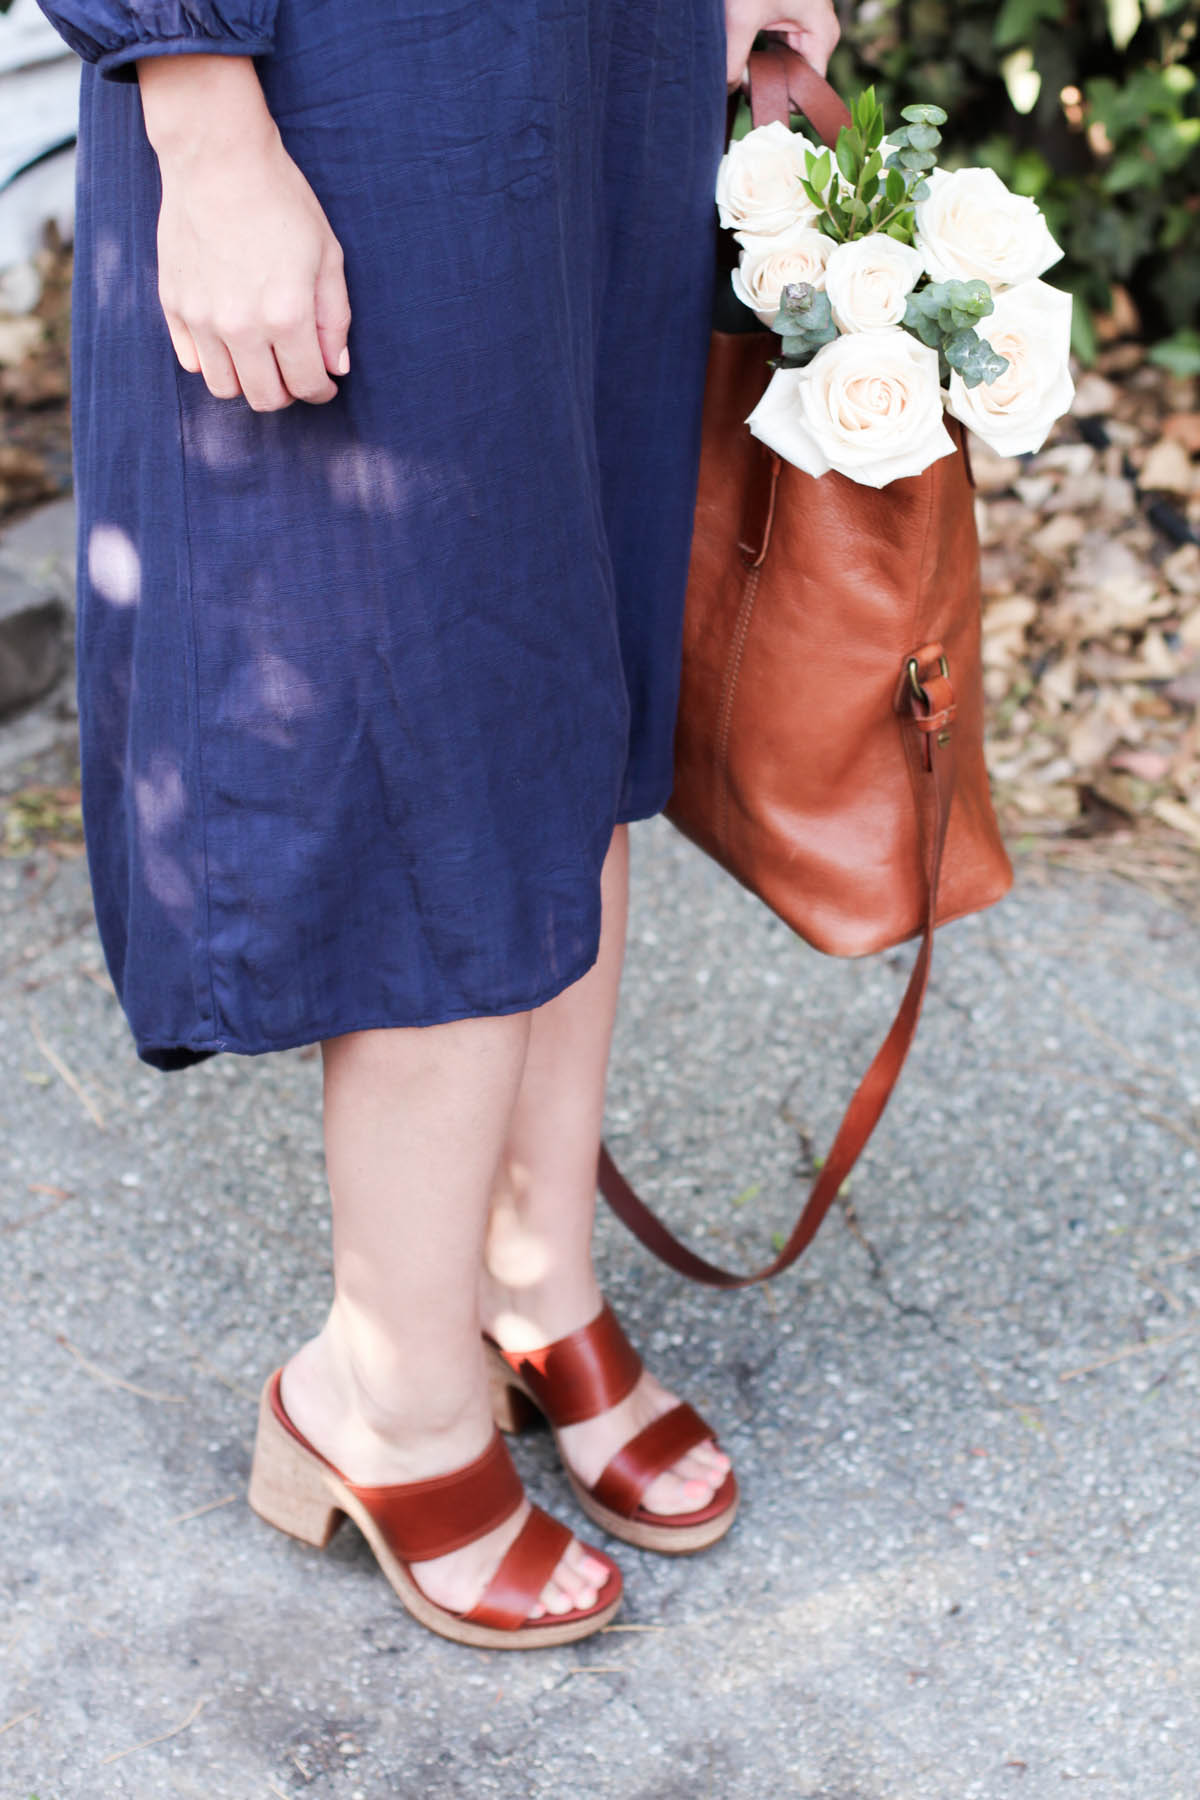 Amanda Holstein in spring outfit navy dress and leather sandals